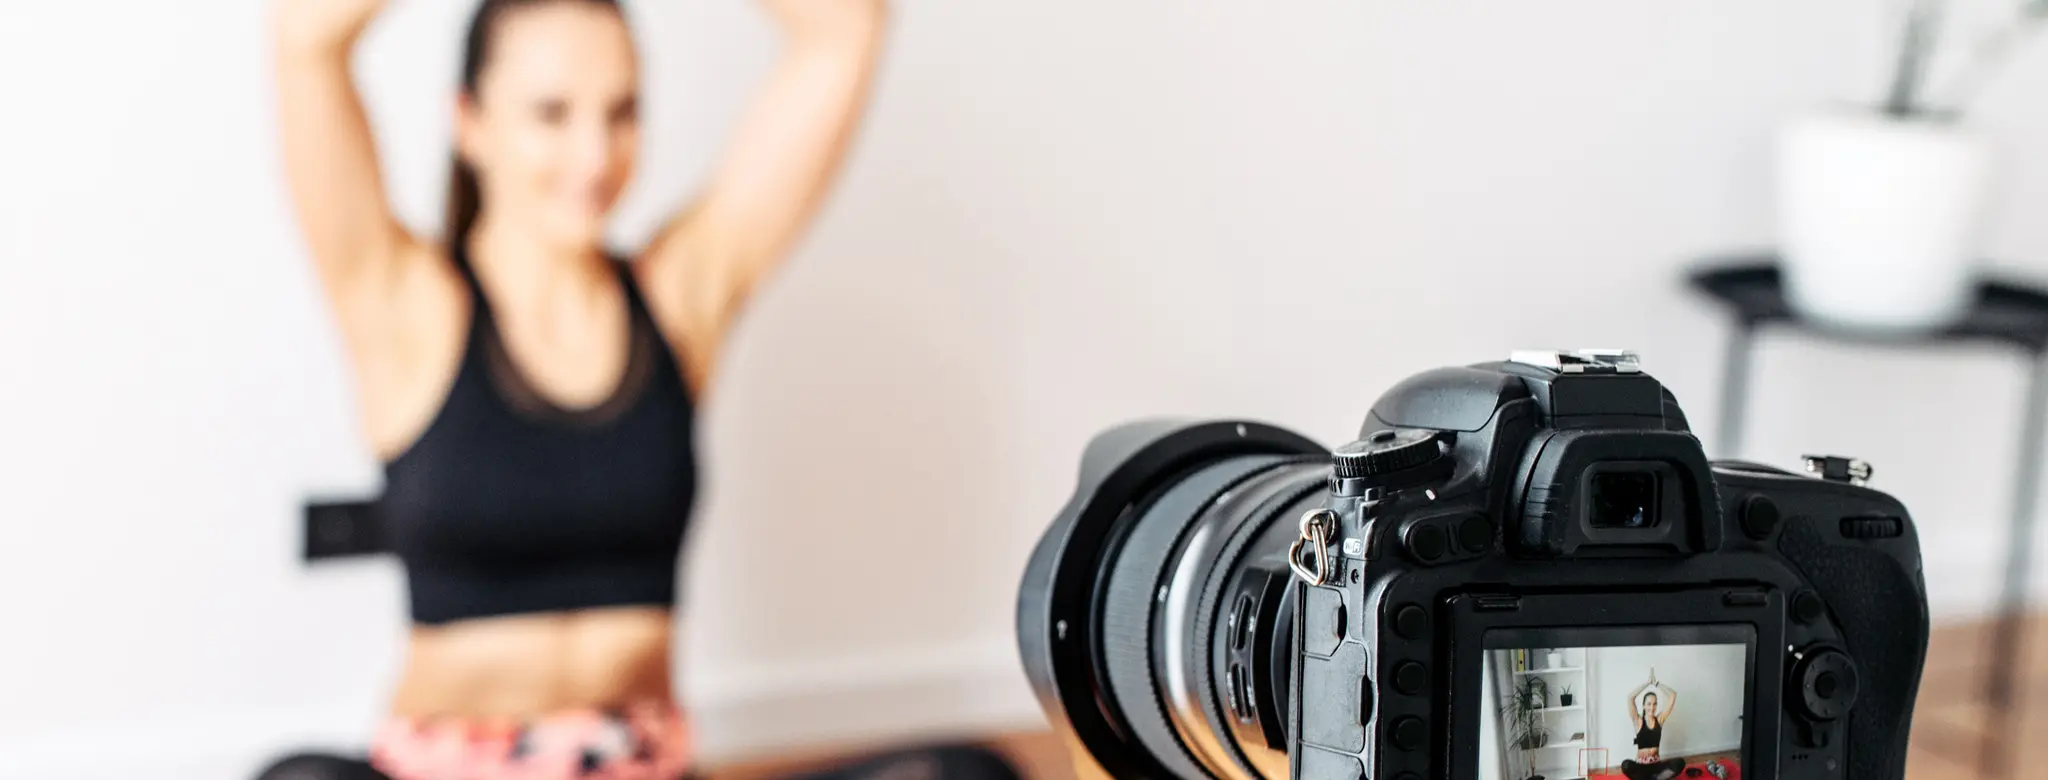 Fitness instructor filming a workout video in front of a camera on a tripod